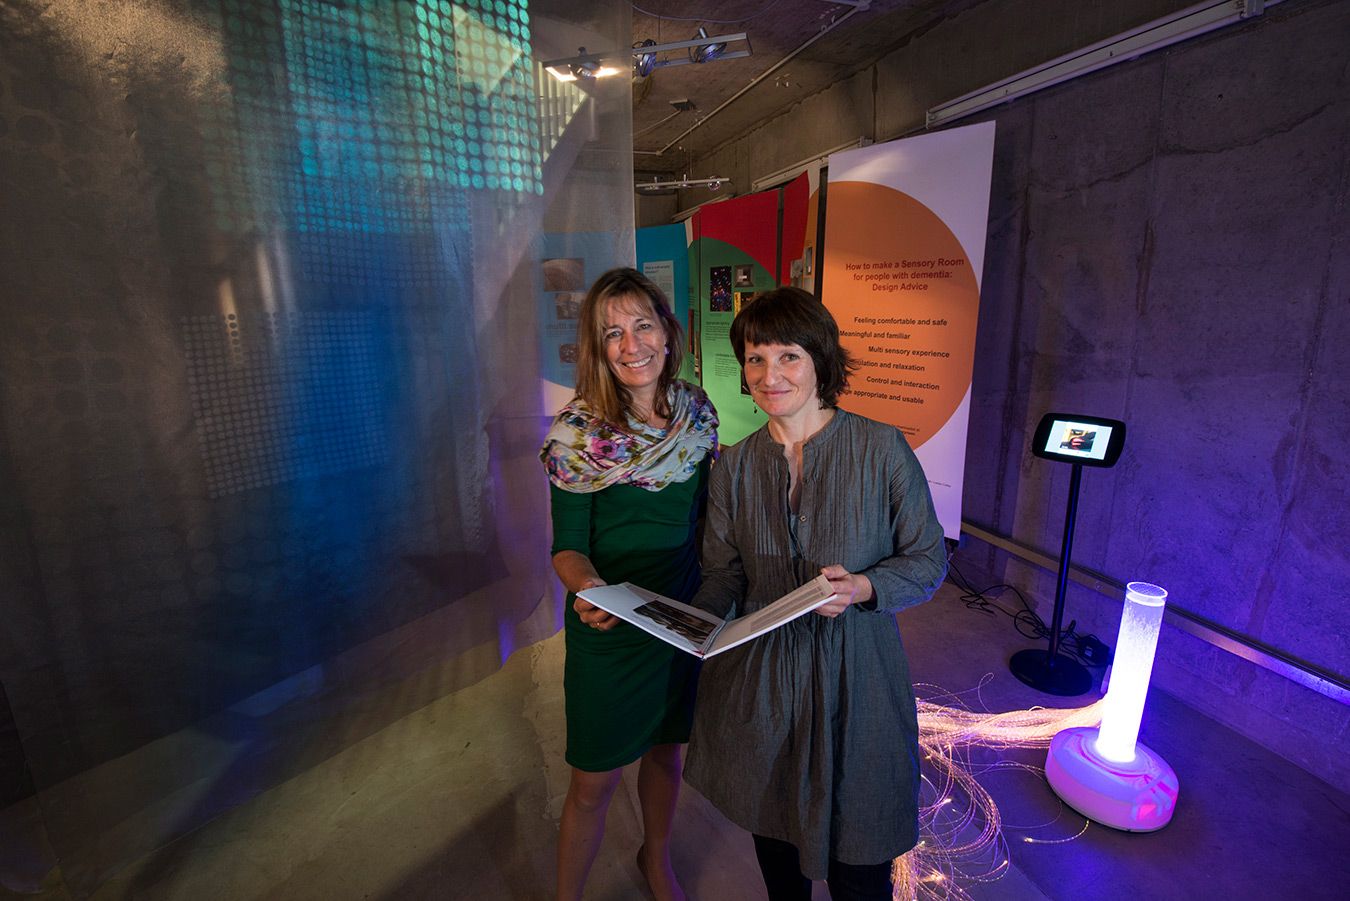 Drs Lesley Collier, left, and Anke Jakob shared their specialist knowledge with visitors to the Sensory Rooms exhibition staged as part of the Inside Out Festival. Image - University of Southampton